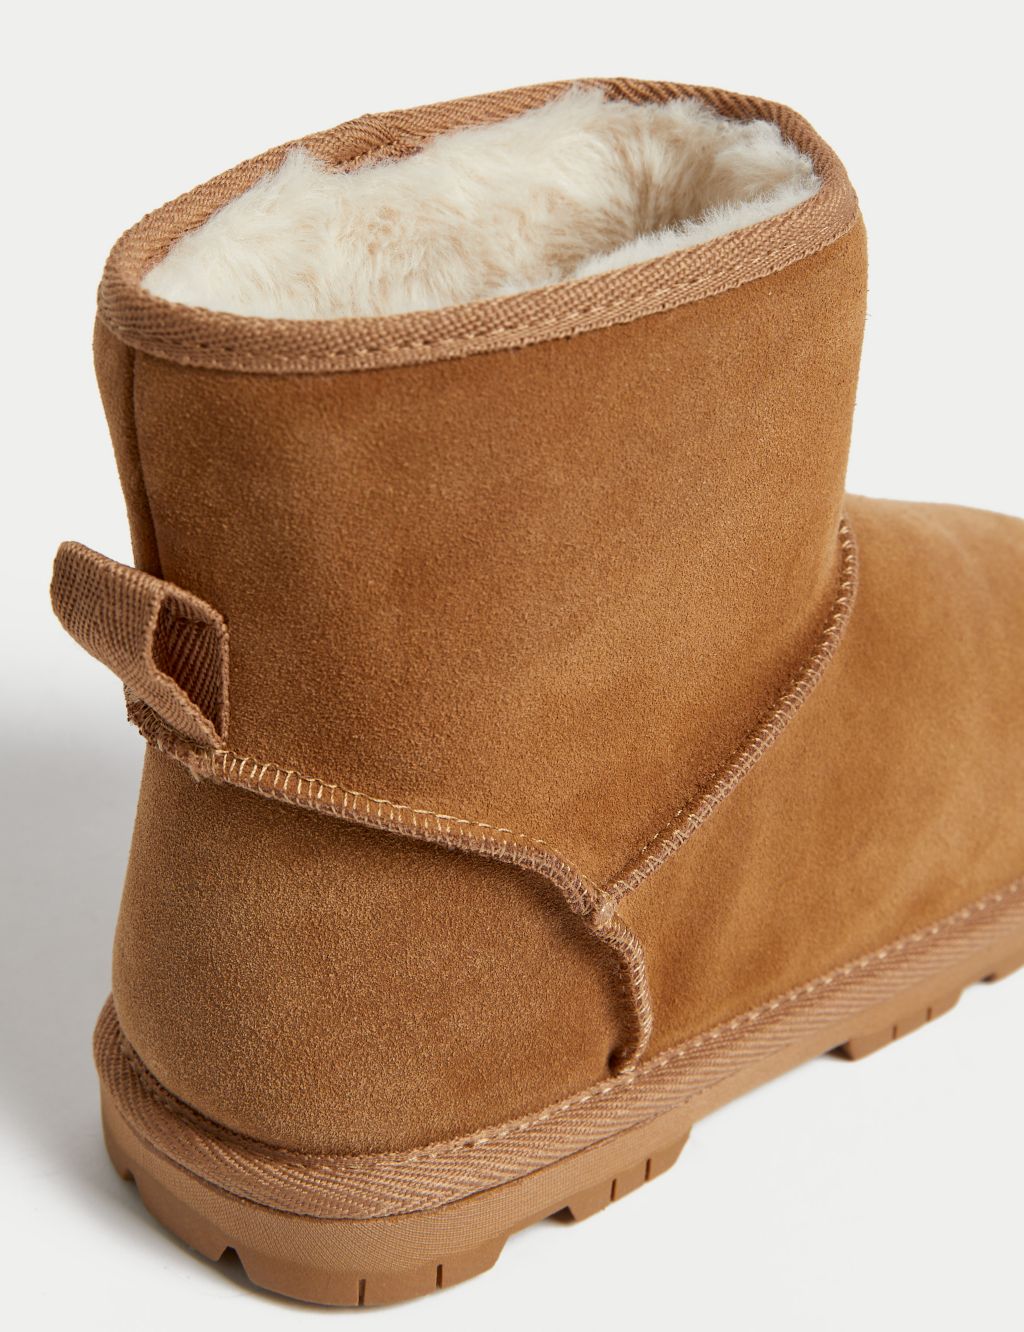 Suede Faux Fur Lined Slipper Boots image 3